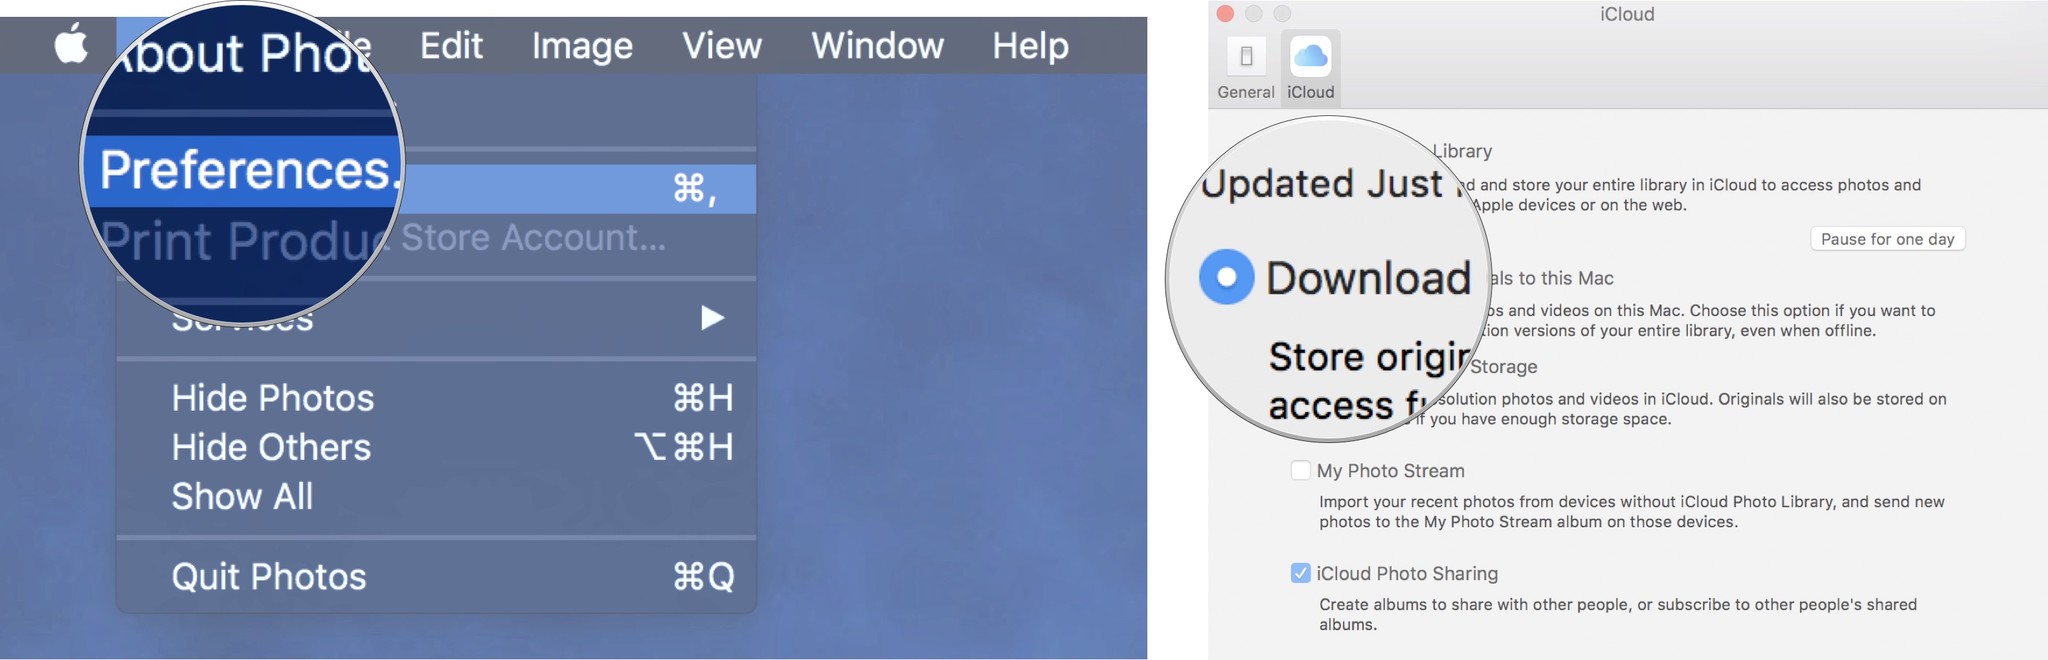 How To Customize Or Disable Optimized Storage On Mac Imore